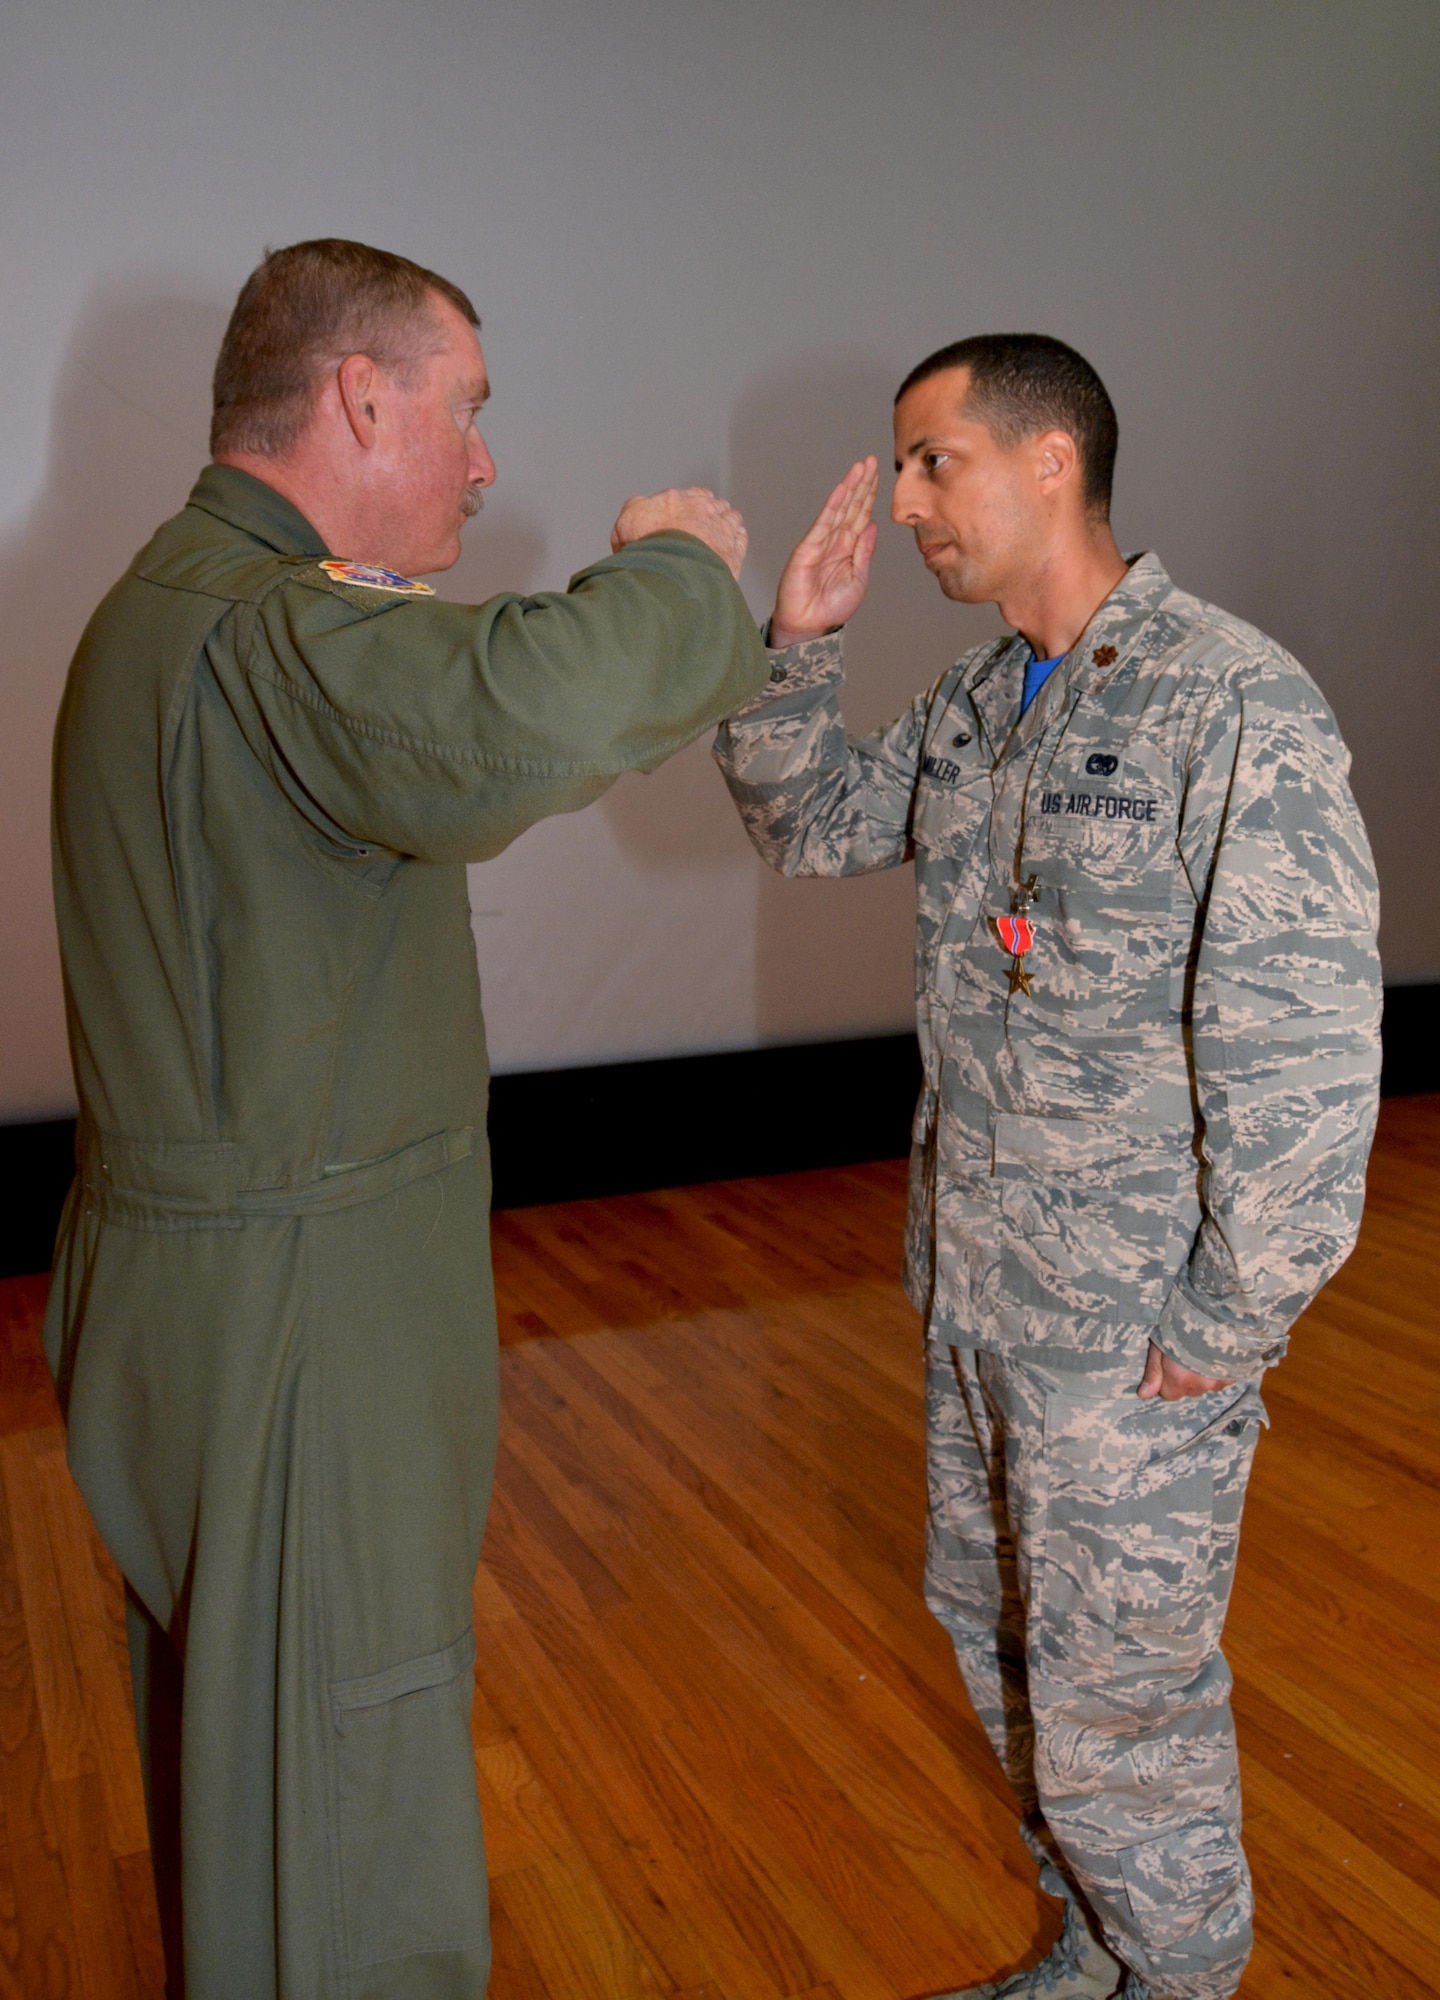 Maj. Damien Miller, 507th Logistics Readiness Squadron commander, receives the Bronze Star Medal from Col. Doug Gullion, 507th Air Refueling Wing commander, during a medal presentation here, Nov. 5, 2017. Miller received the medal for meritorious service in Iraq from Jan. 7 to July 8, 2017, while serving as the 442nd Air Expeditionary Squadron commander. Miller commanded all six coalition aerial ports within Iraq to transport 33,600 tons of cargo and 37,800 passengers on more than 4,500 missions. (U.S. Air Force Photo/Tech Sgt. Samantha Mathison)